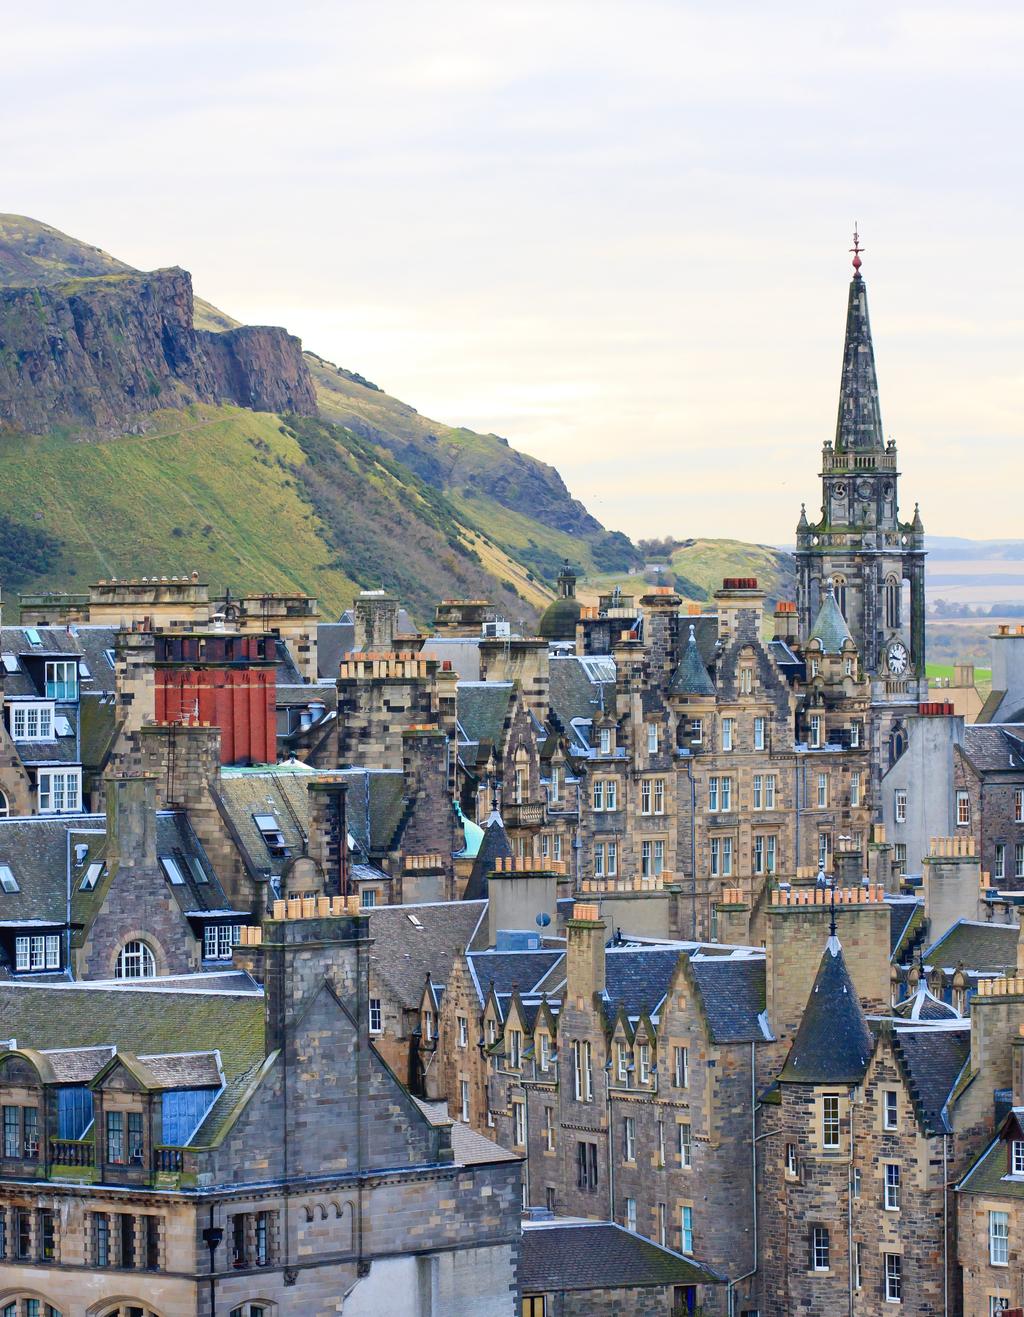 Dear Rochester alumni and friends, The University of Rochester Travel Club is pleased to invite you to join us on this brand new, six-night program to Edinburgh for the 72nd Edinburgh Festival